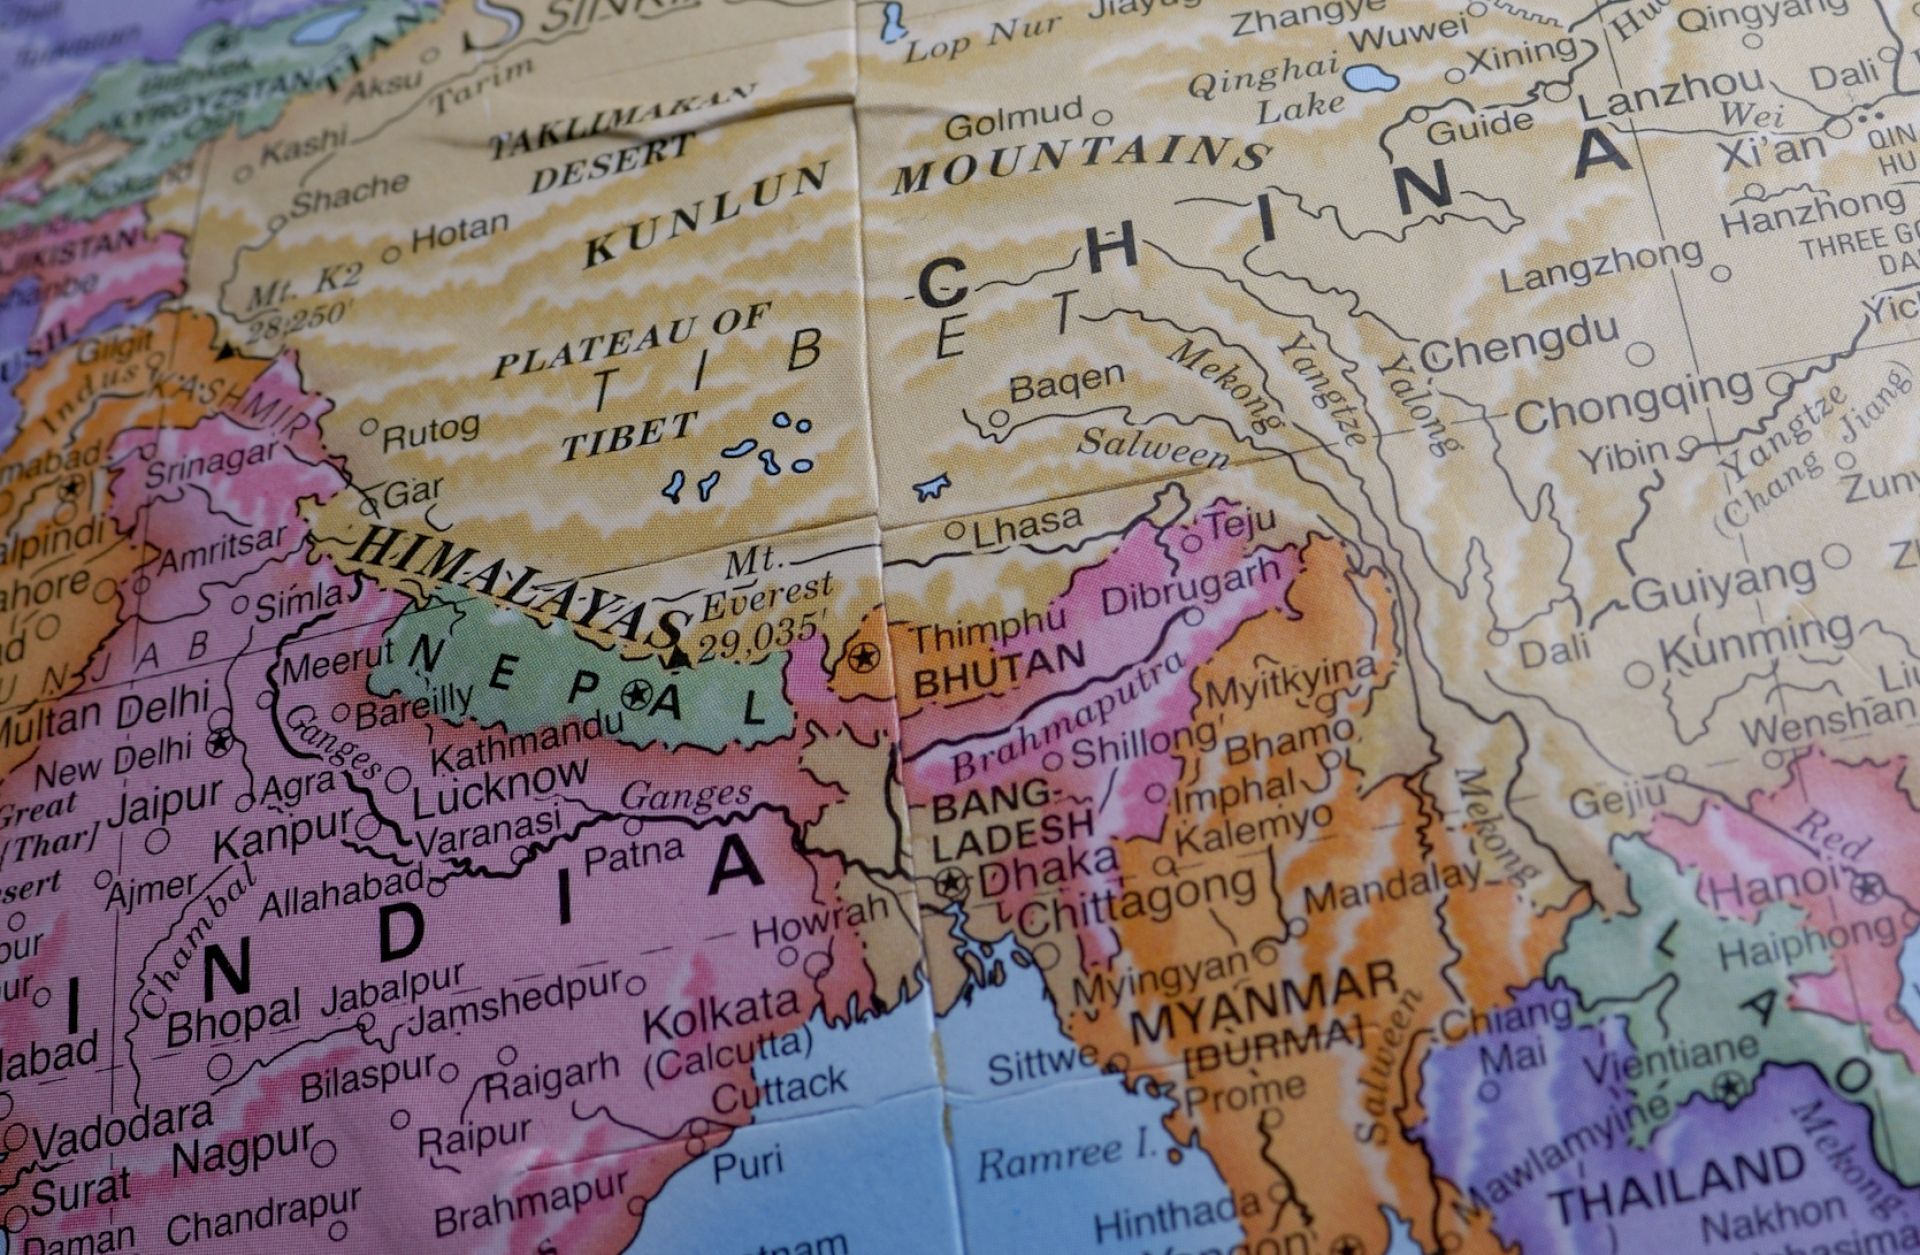 In this photo, a map shows the positions of China and India on the globe.